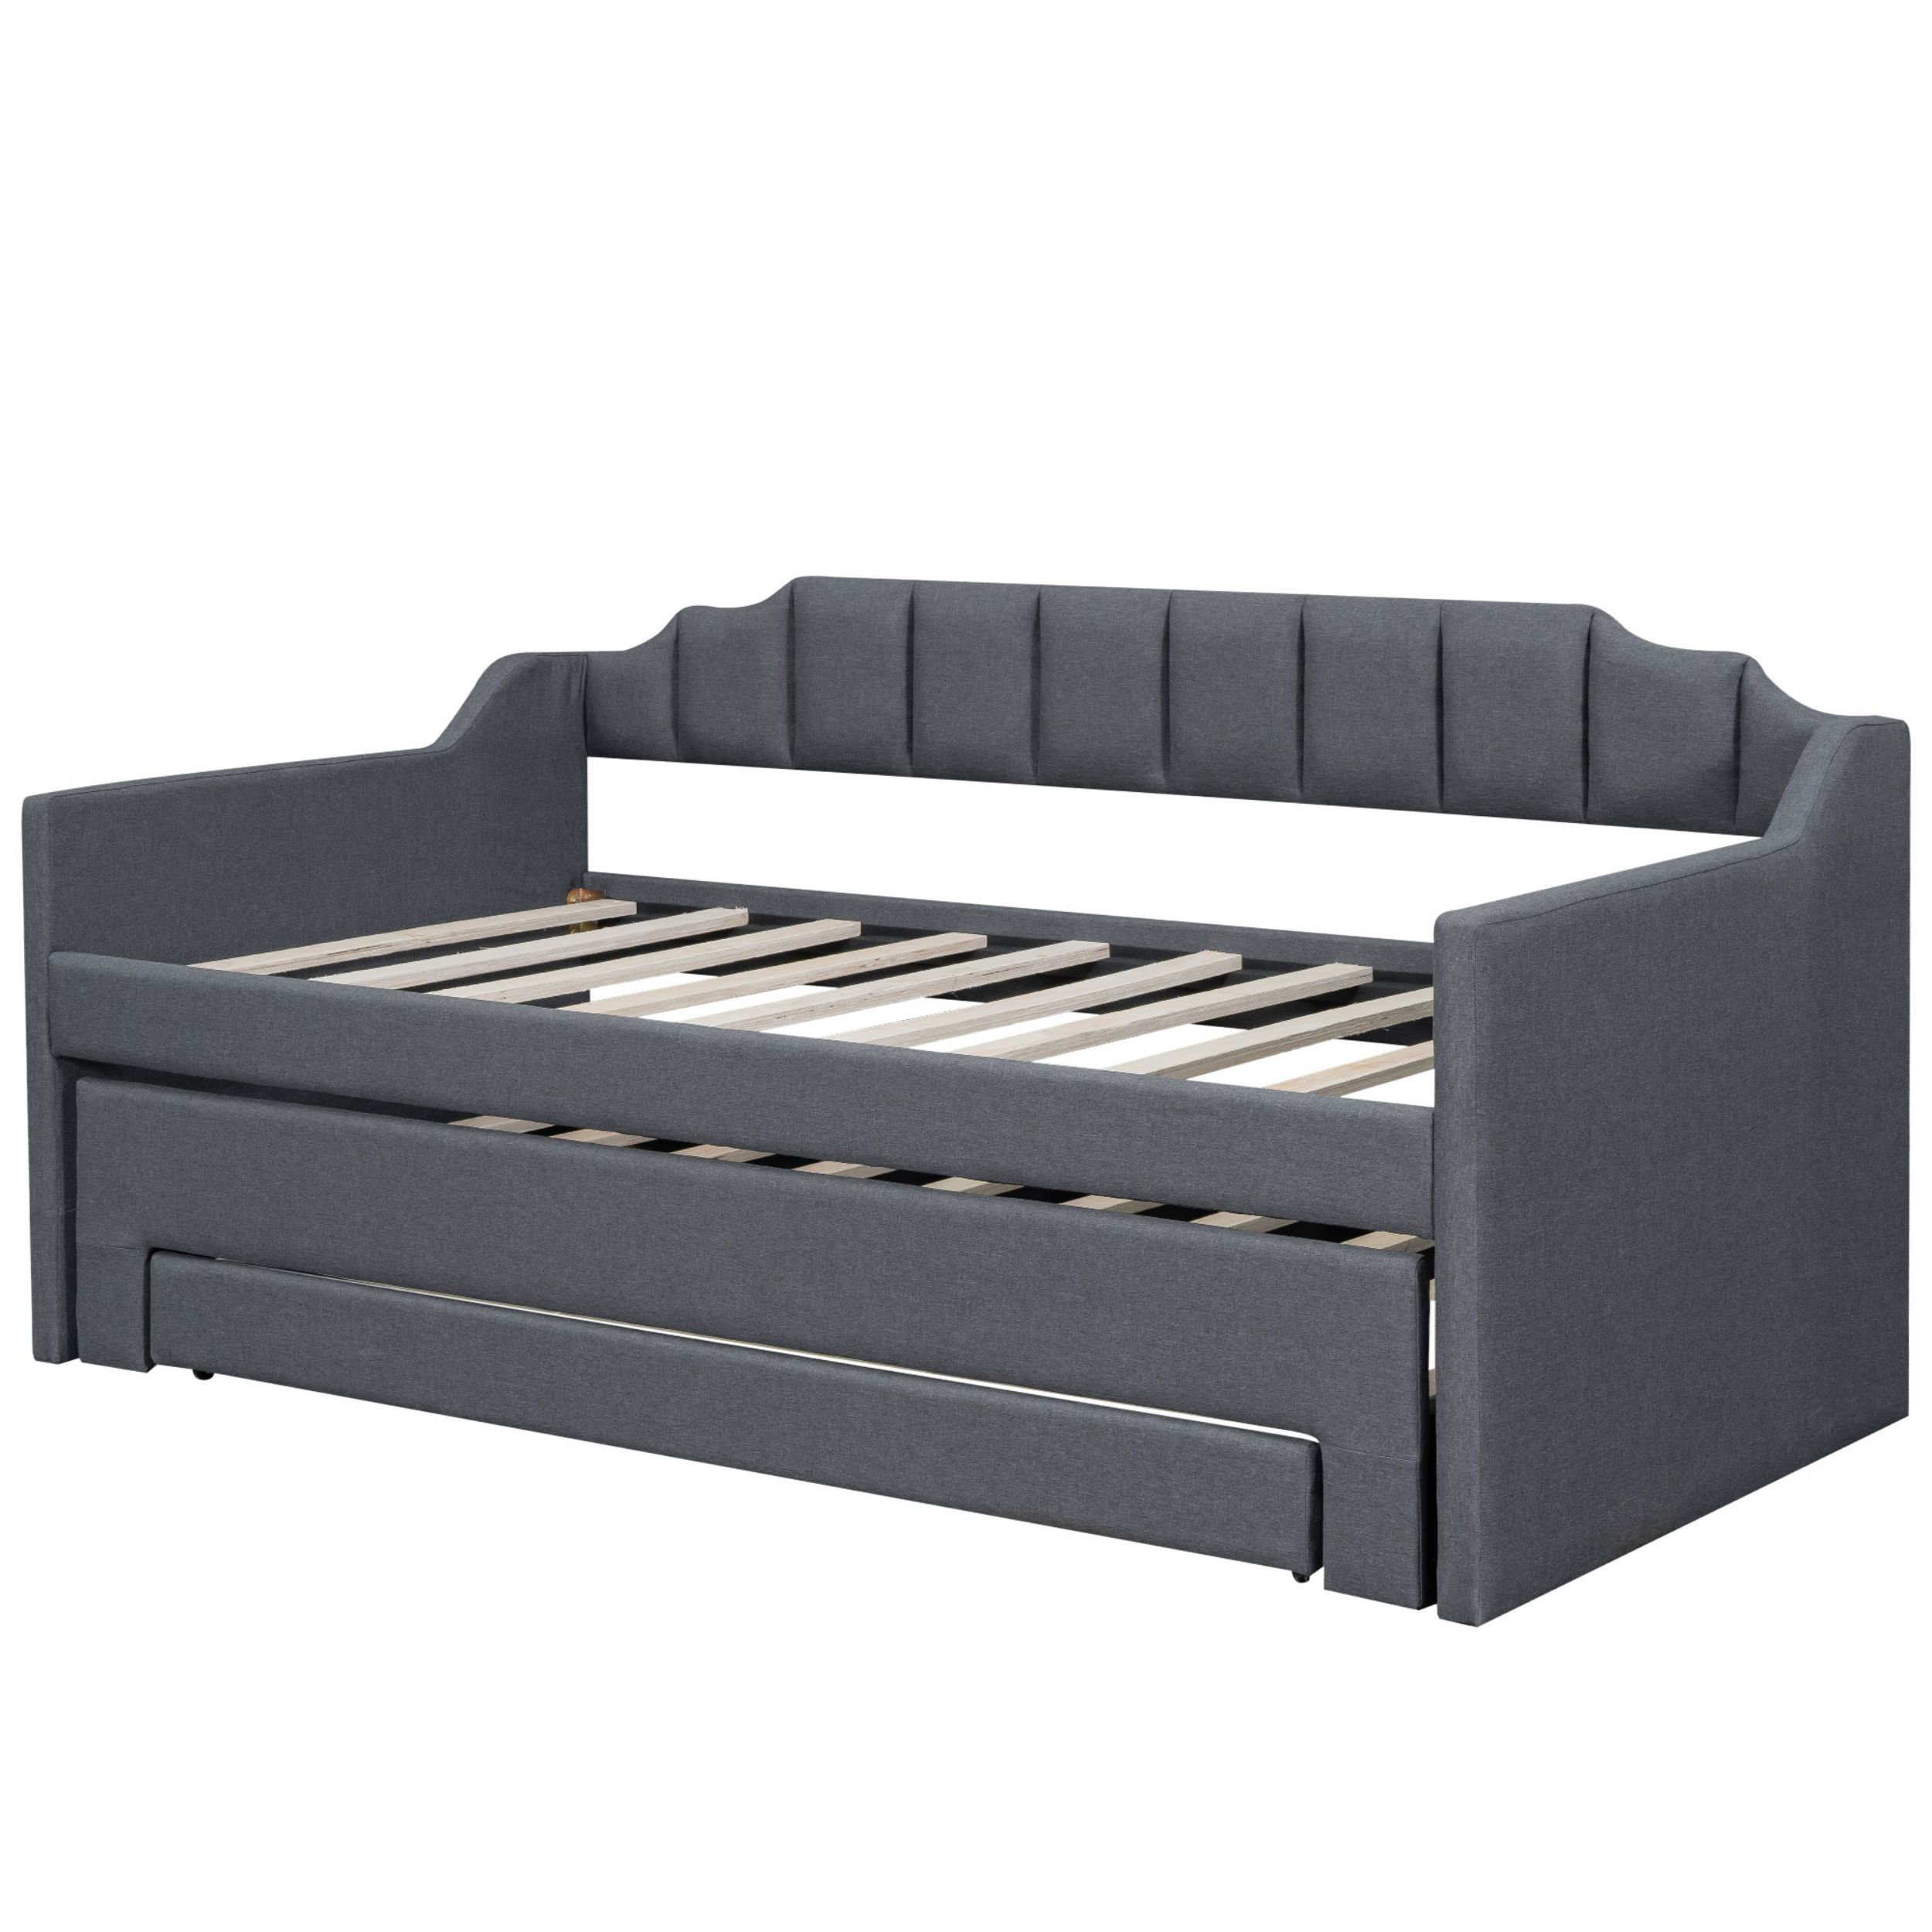 Everly Quinn Zadia Upholstered Daybed with Trundle | Wayfair